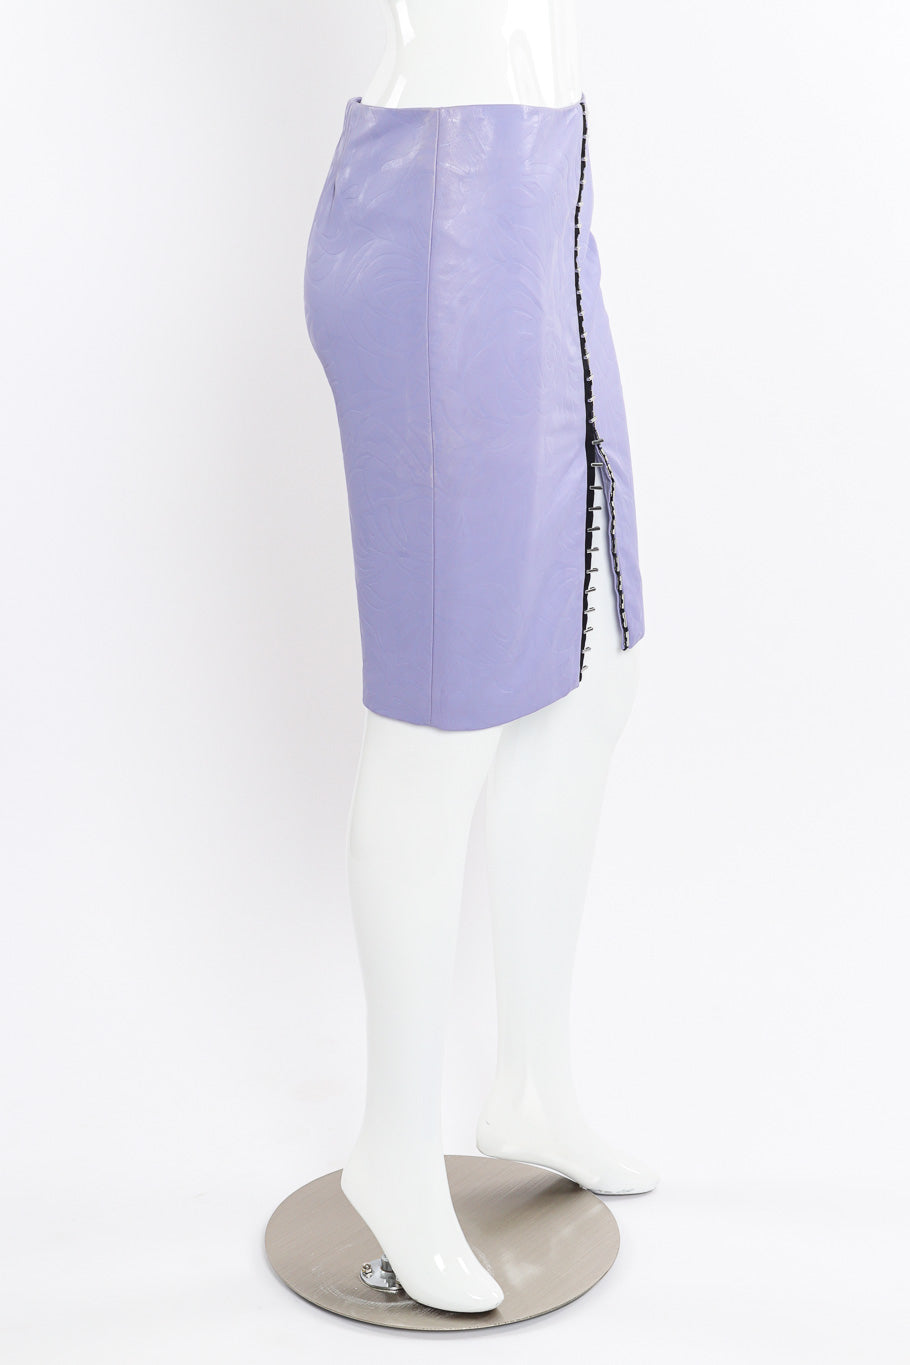 Versace Embossed Leather Pencil Skirt side view on mannequin @Recessla